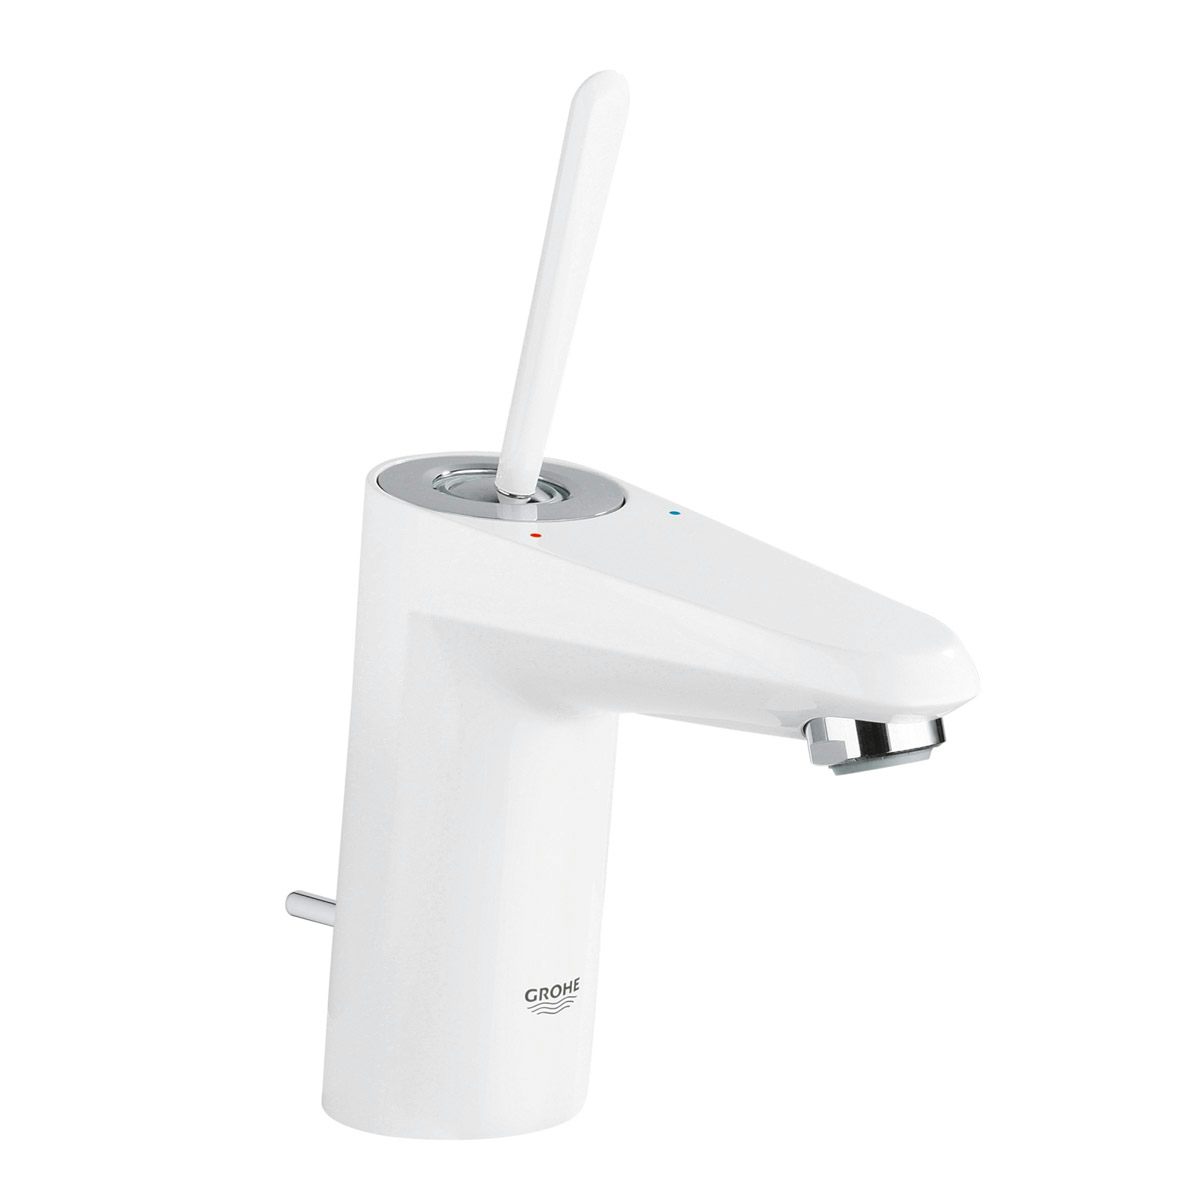 Grohe Eurodisc Joy basin mixer tap white with waste and tap adaptor